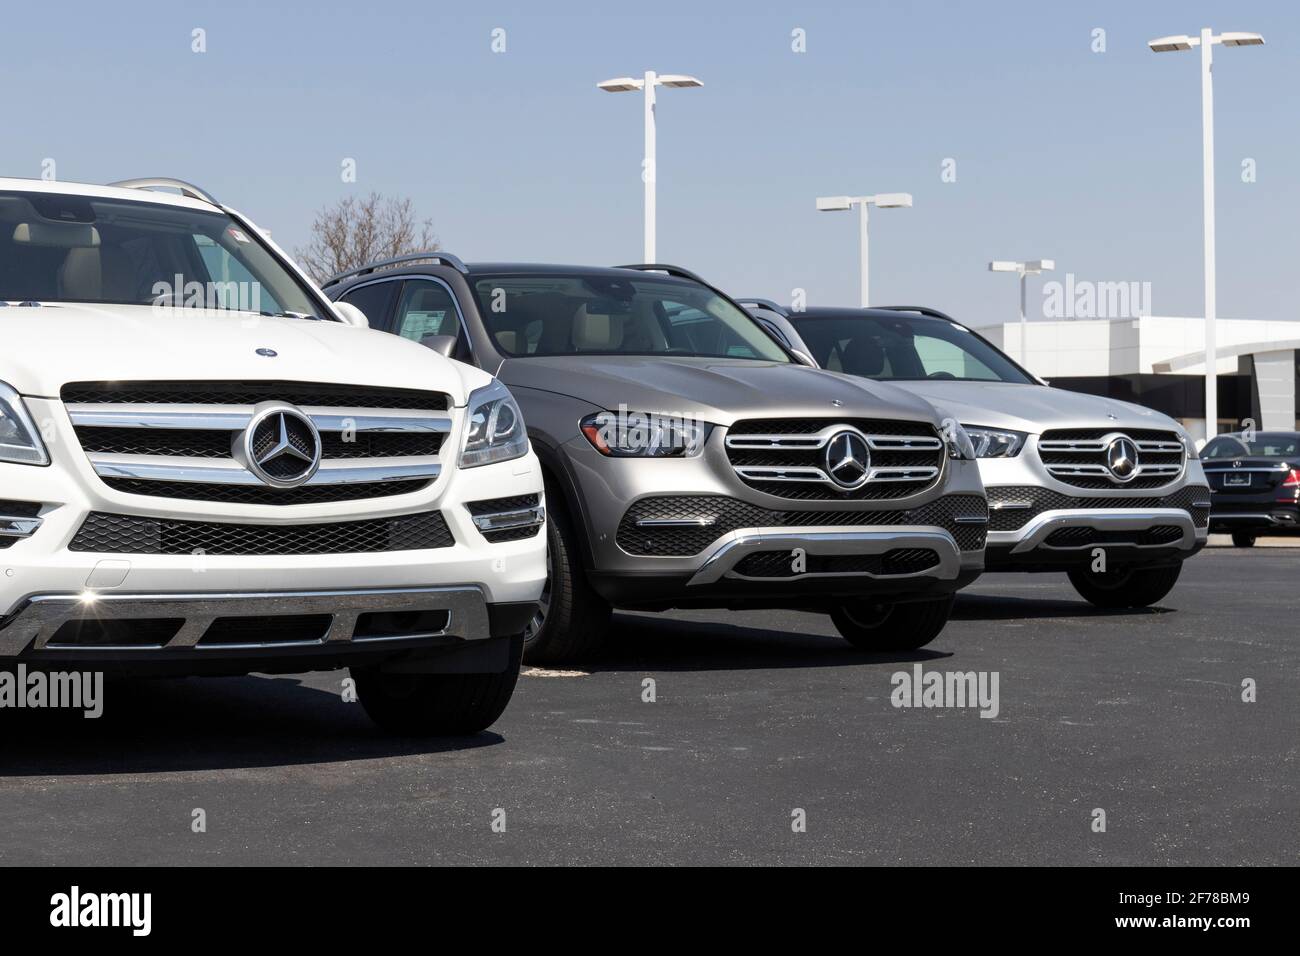 Lafayette - Circa April 2021: Mercedes-Benz Dealership. Mercedes-Benz is a global automobile manufacturer and a division of Daimler AG. Stock Photo